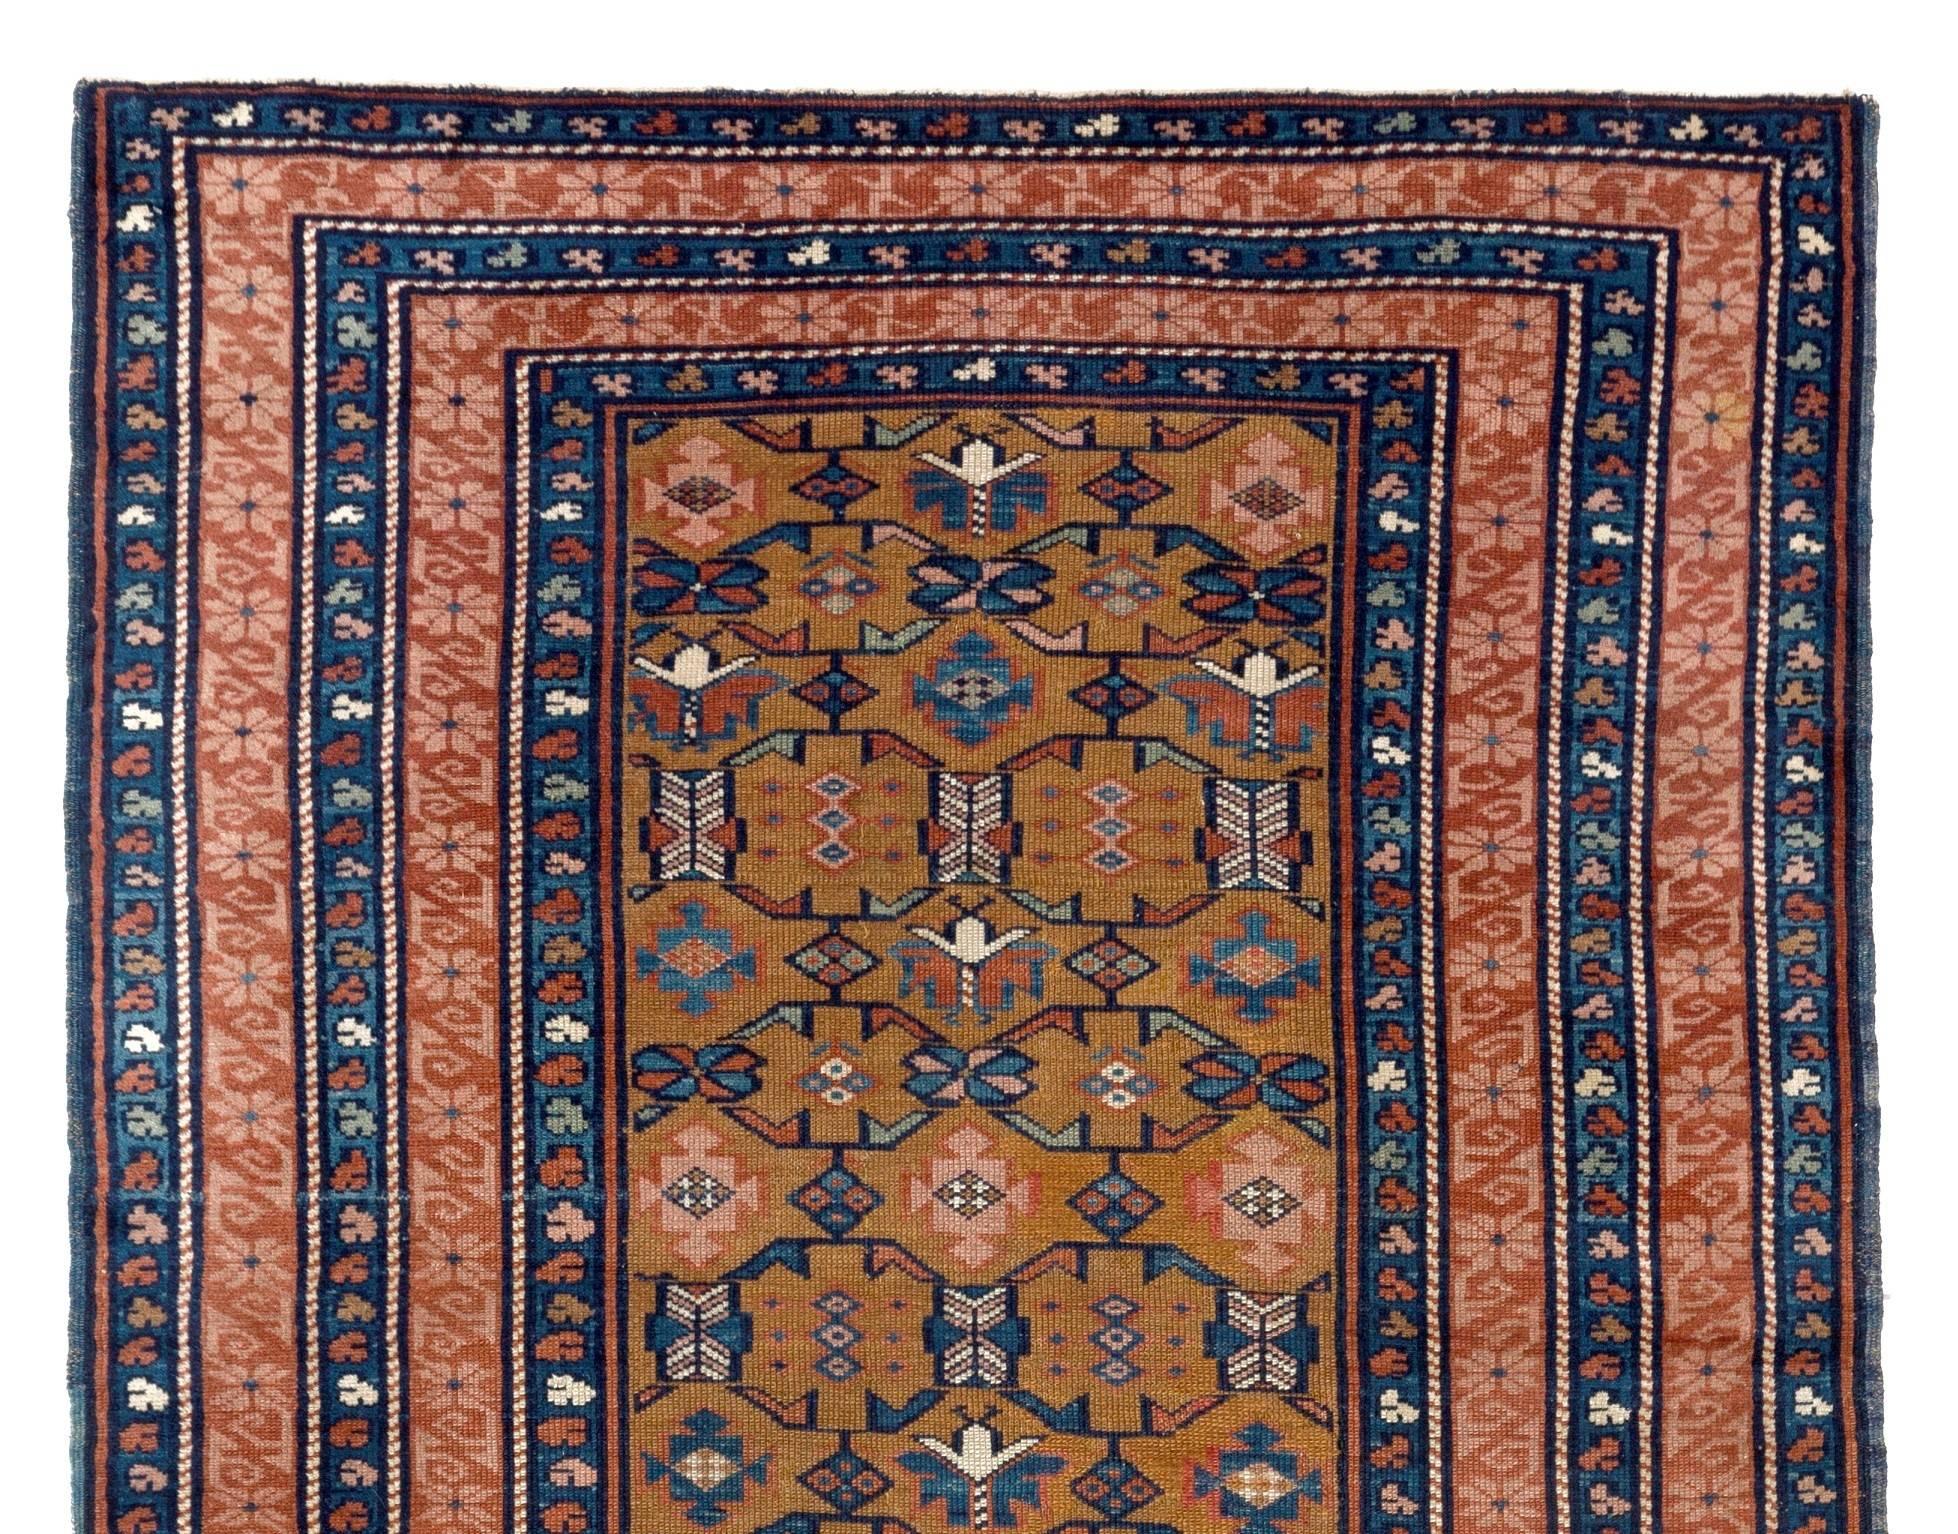 Antique Caucasian Seichur rug with dark yellow ground and rare triple border.
Finely hand-knotted with even medium wool pile on wool foundation. Very good condition. Sturdy and as clean as a brand new rug (deep washed professionally).